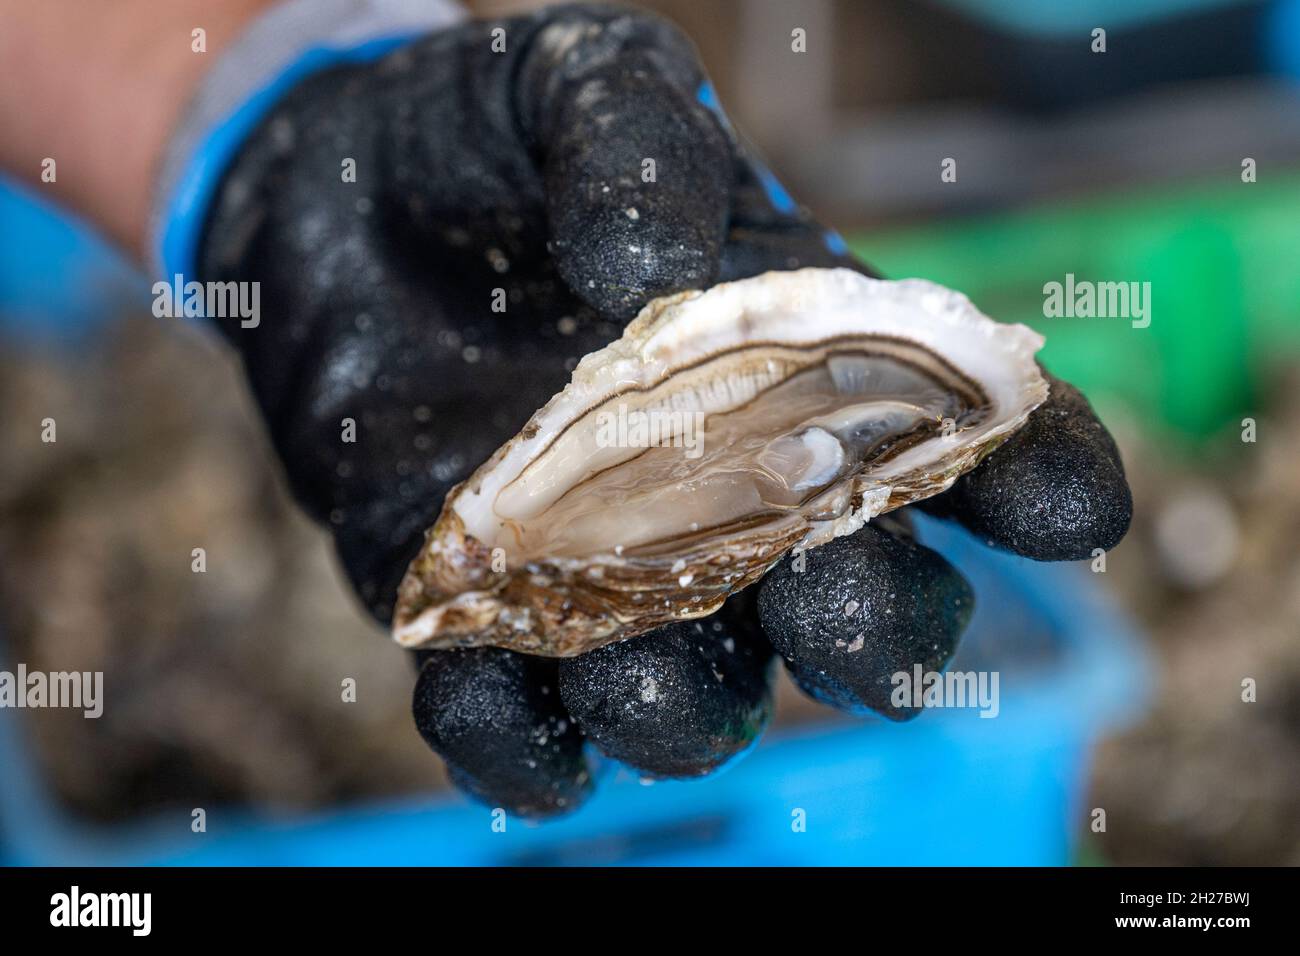 A freshly opened oyster from the Cap Ferret at the Bassin d'Arcachon, France Stock Photo